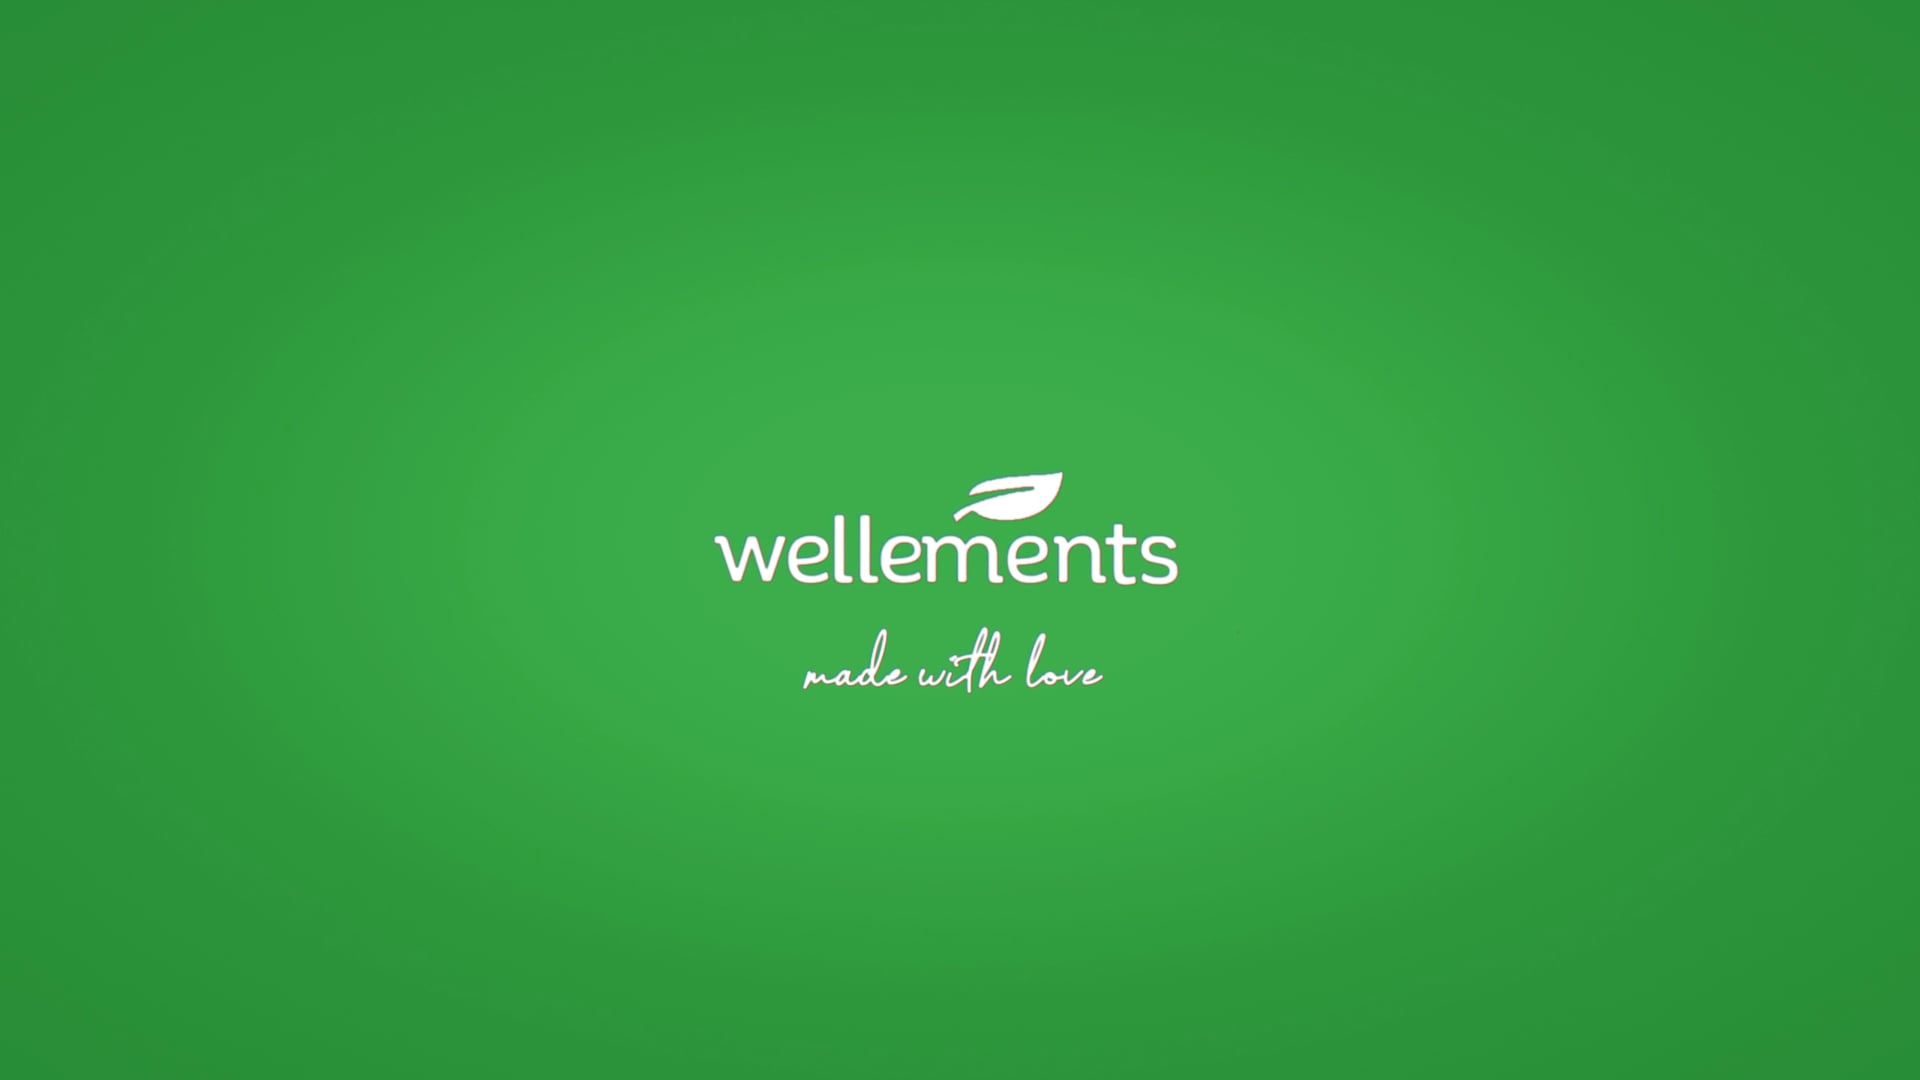 Wellements | Product Instruction Videos